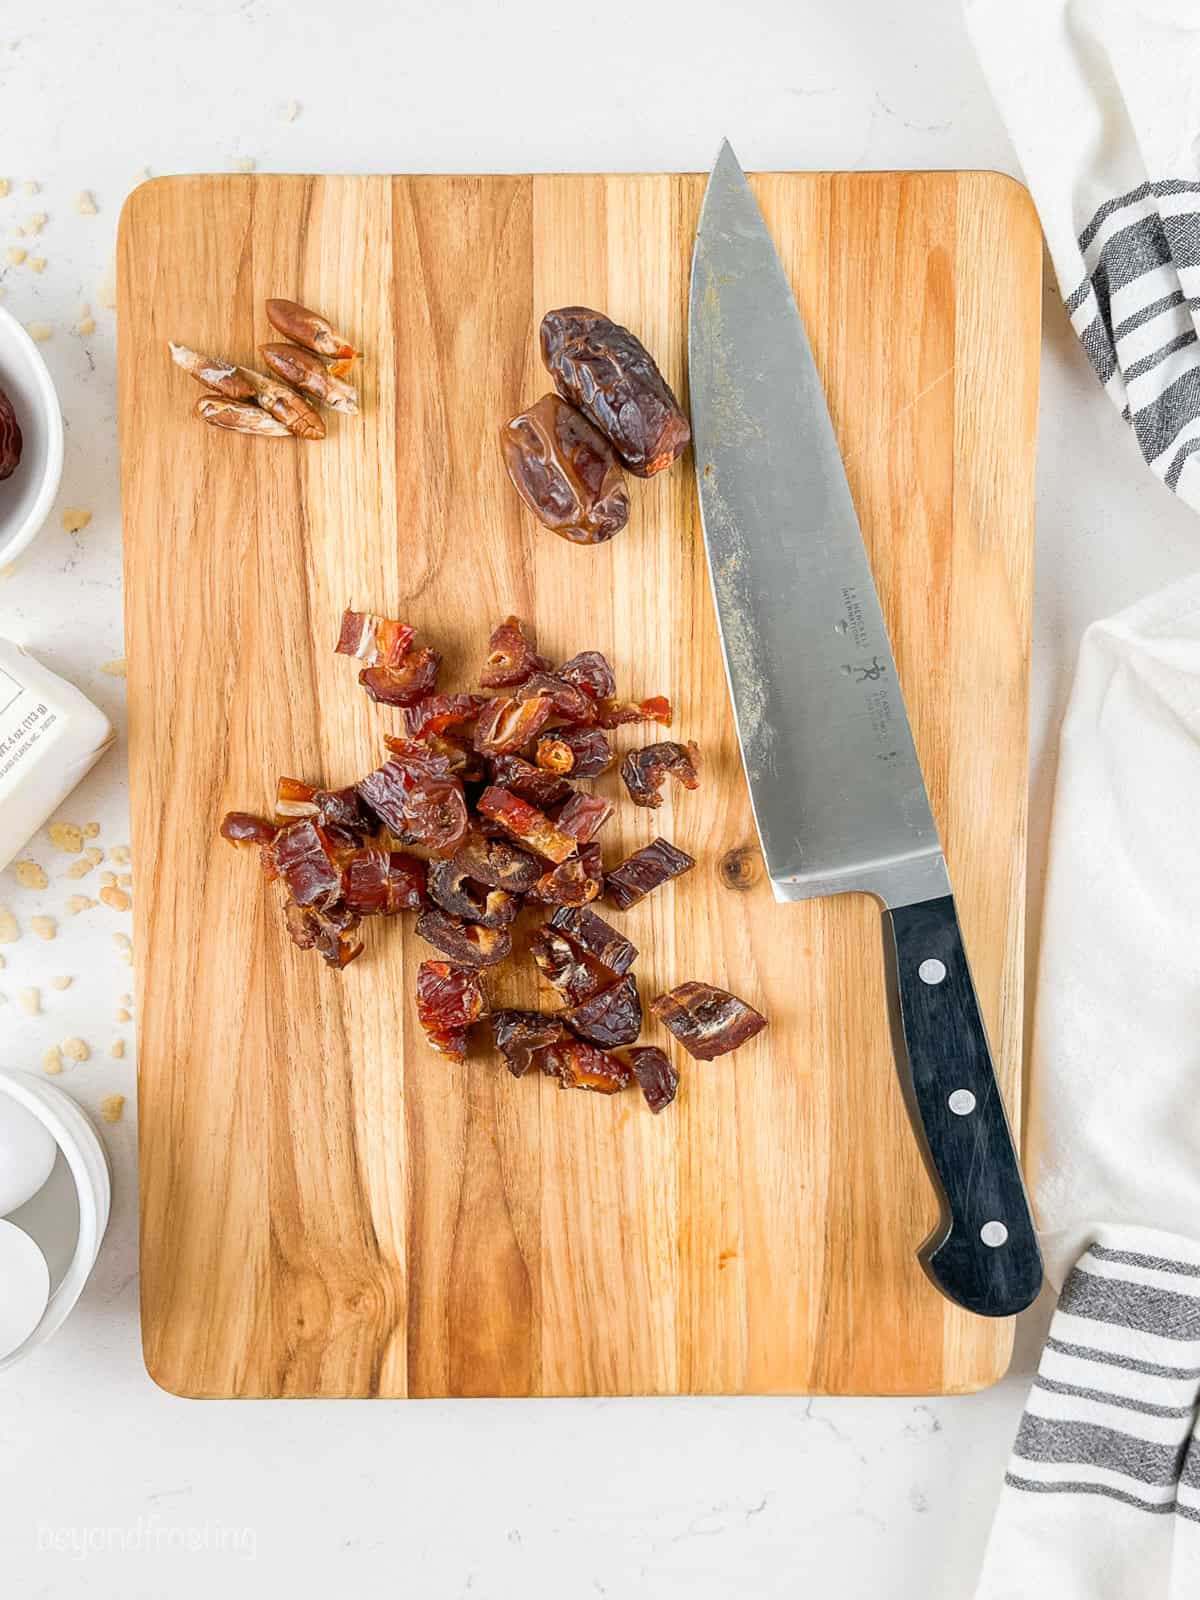 Overhead view of chopped pitted dates on a wooden cutting board next to a large knife.